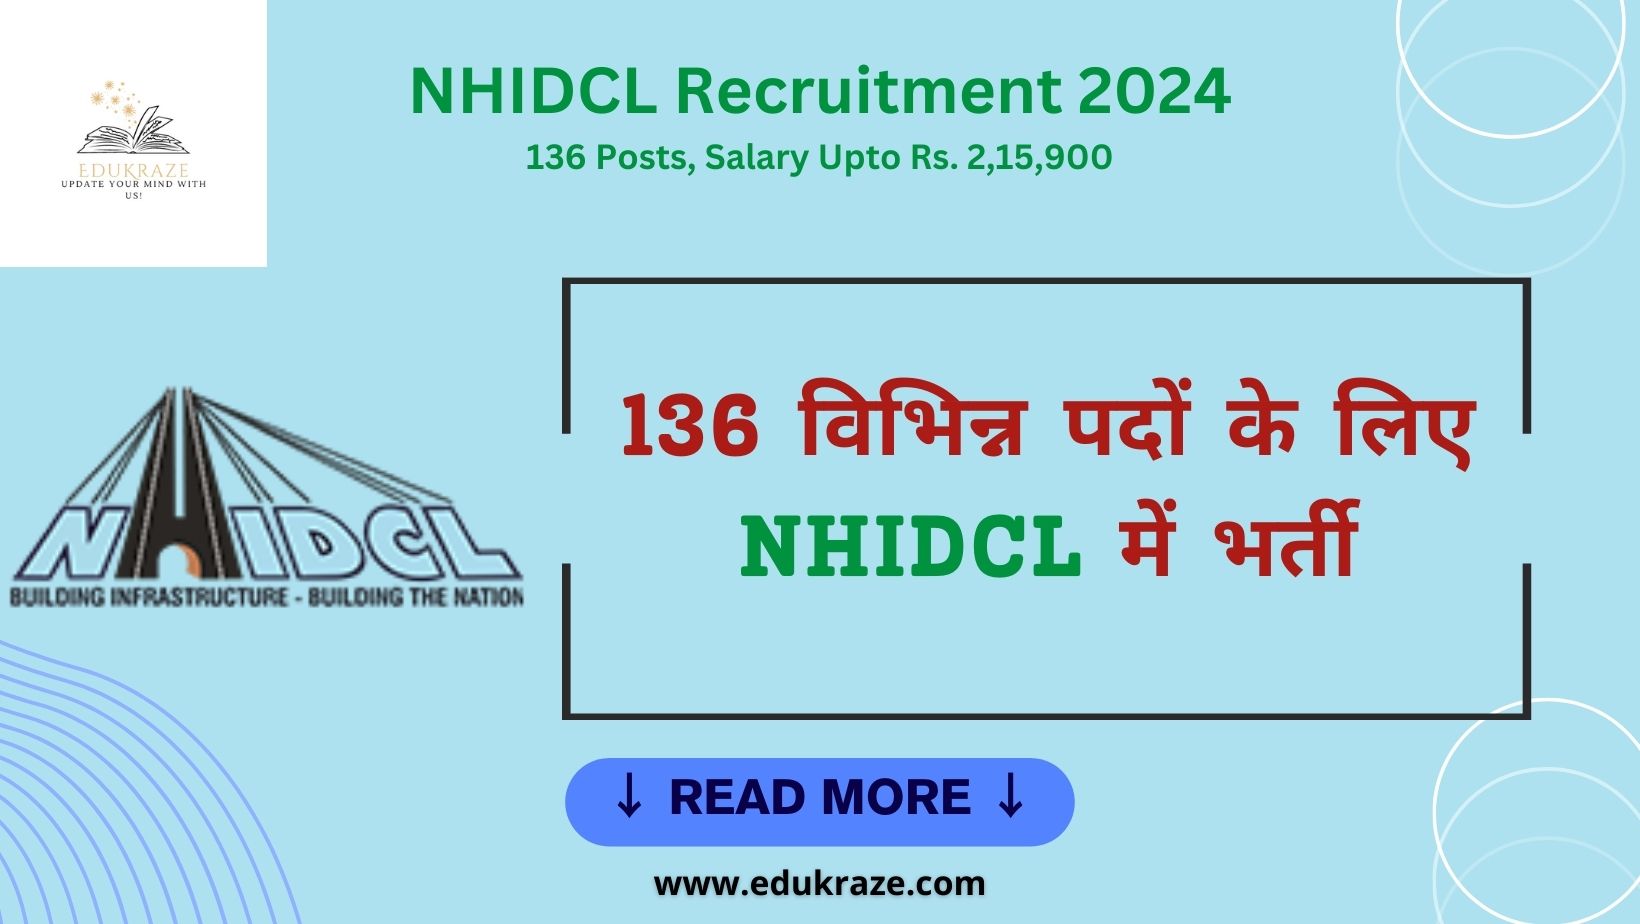 NHIDCL Recruitment 2024 Out for 136 Posts, Salary Upto Rs. 2,15,900